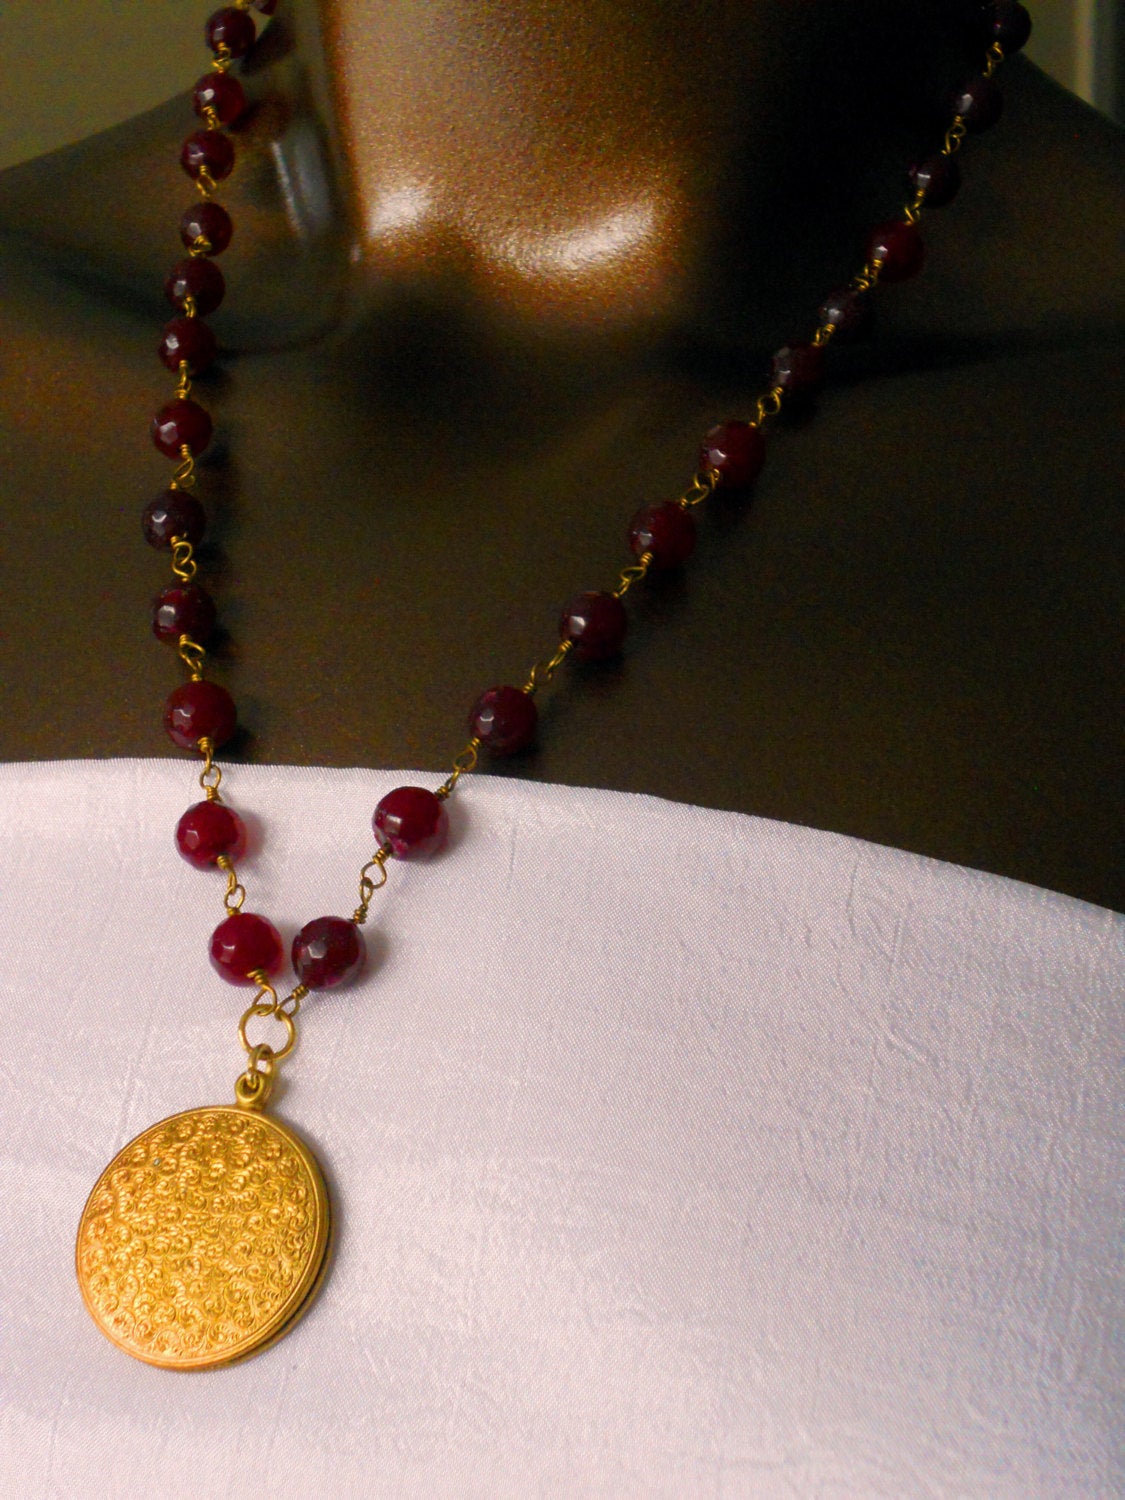 Vintage Lord's Prayer Lock Red Agate Wire Wrapped Chain Necklace, Silent Prayer Necklace